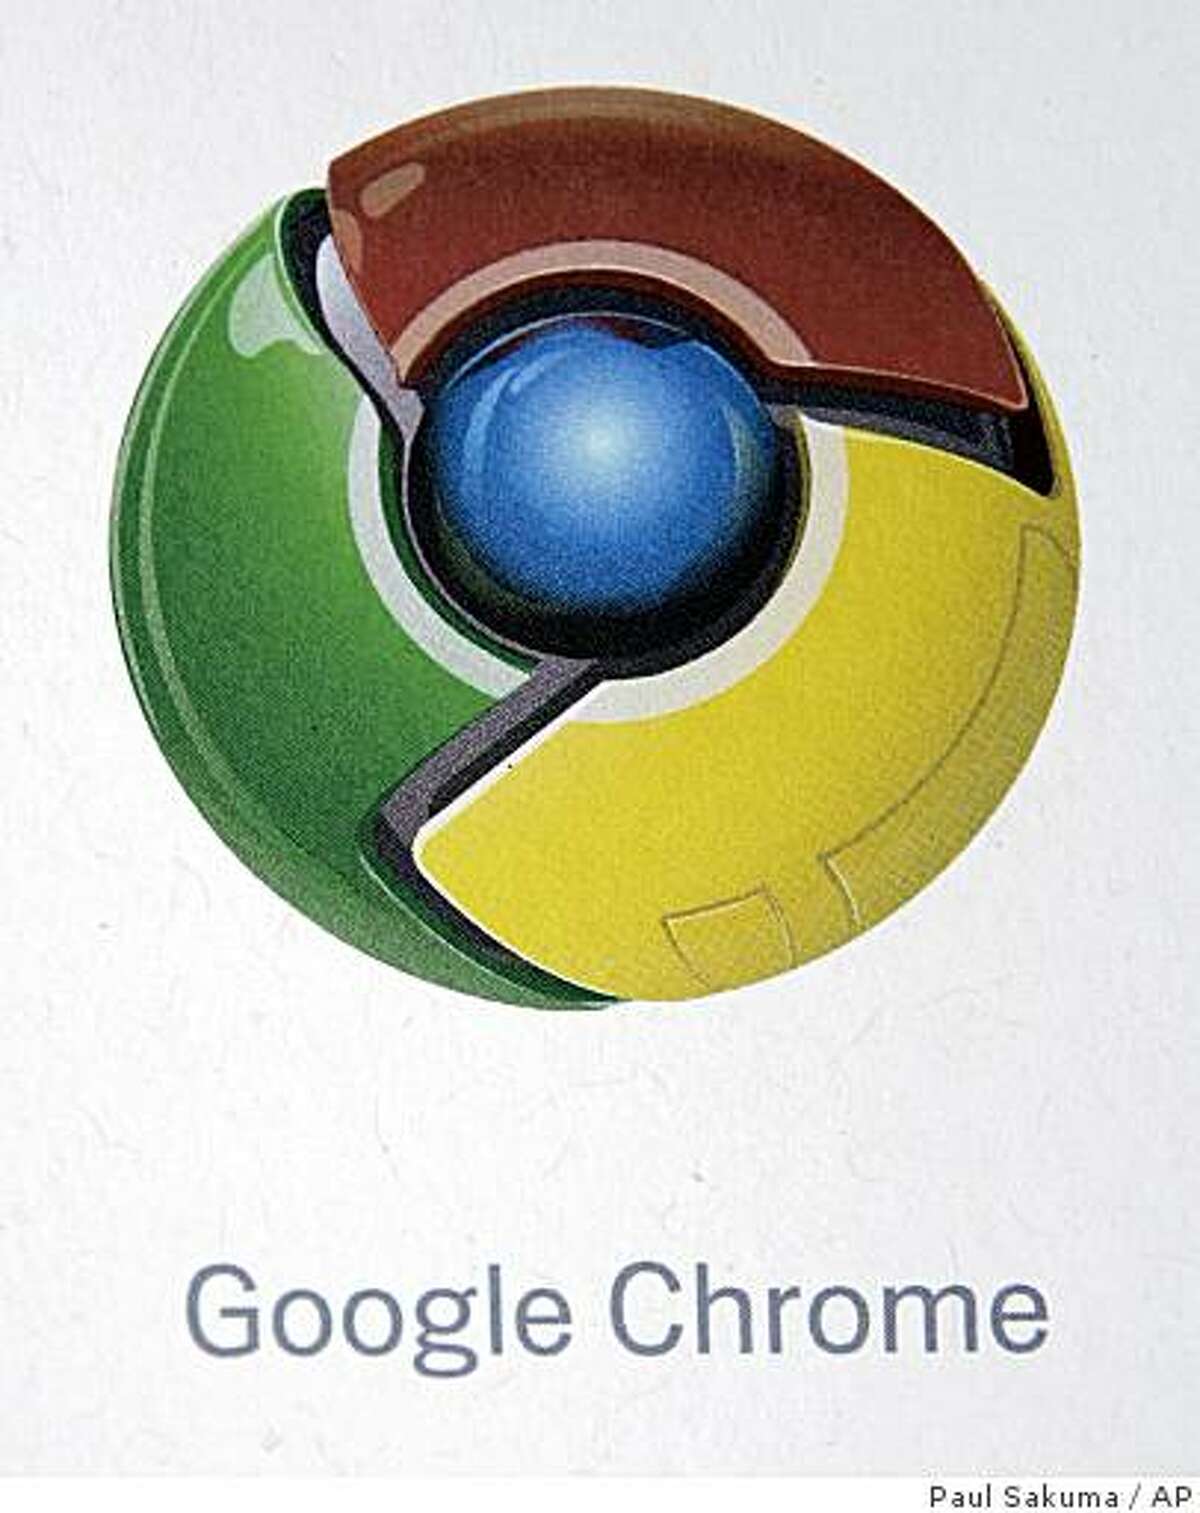 The logo for the Google Chrome Web browser is shown during a news conference at Google Inc. headquarters in Mountain View, Calif., Tuesday, Sept. 2, 2008. Google Inc. is releasing the Web browser in a long-anticipated move aimed at countering the dominance of Microsoft Corp.'s Internet Explorer and ensuring easy access to its market-leading search engine. (AP Photo/Paul Sakuma)